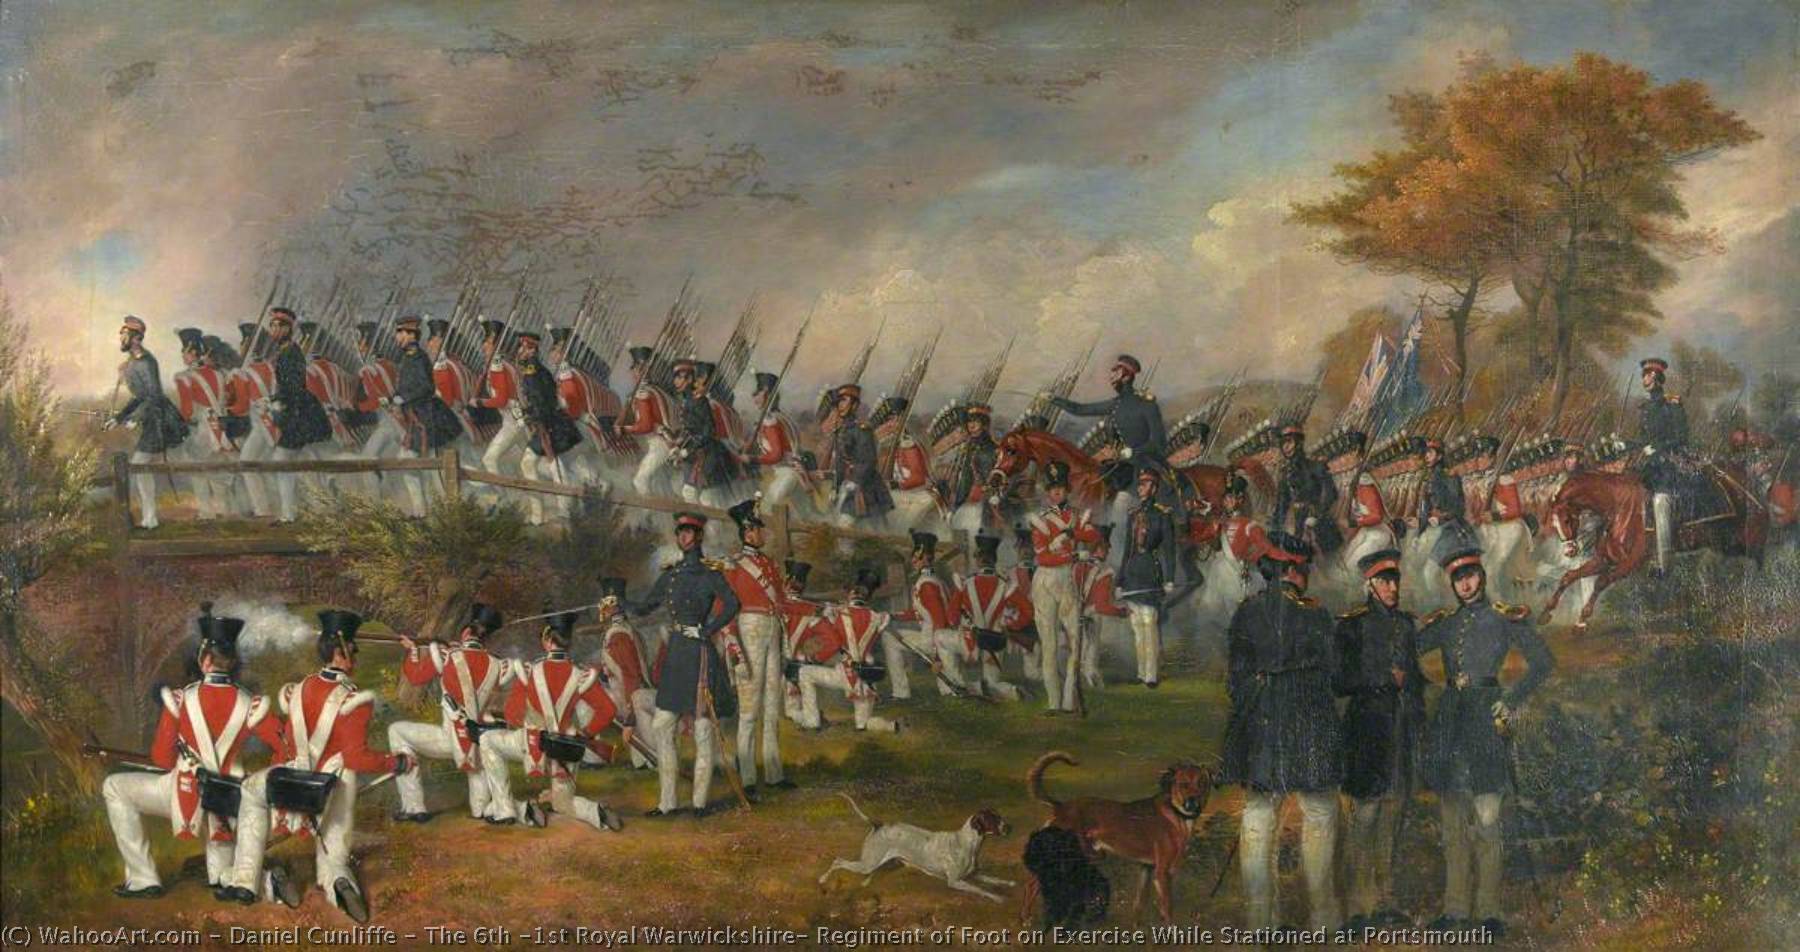 Order Artwork Replica The 6th (1st Royal Warwickshire) Regiment of Foot on Exercise While Stationed at Portsmouth, 1843 by Daniel Cunliffe (1801-1871) | ArtsDot.com